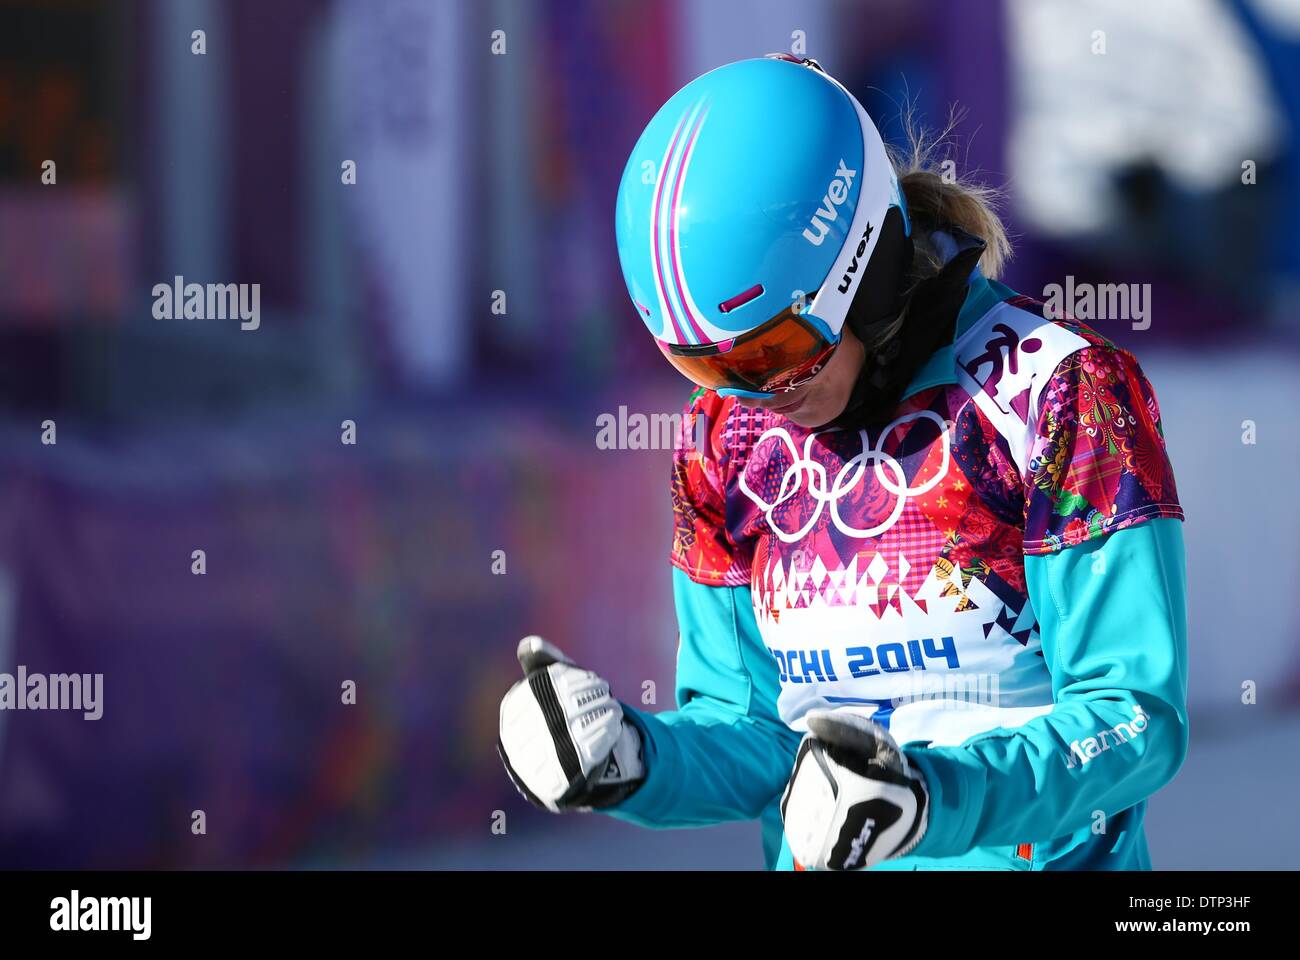 Sochi, Russia. 22nd February 2014. Selina Joerg of Germany reacts after her run during the Ladies' Snowboard Parallel Slalom (PSL) of the Snowboard event in Rosa Khutor Extreme Park at the Sochi 2014 Olympic Games, Krasnaya Polyana, Russia, 22 February 2014. Photo: Daniel Karmann/dpa/Alamy Live News Stock Photo